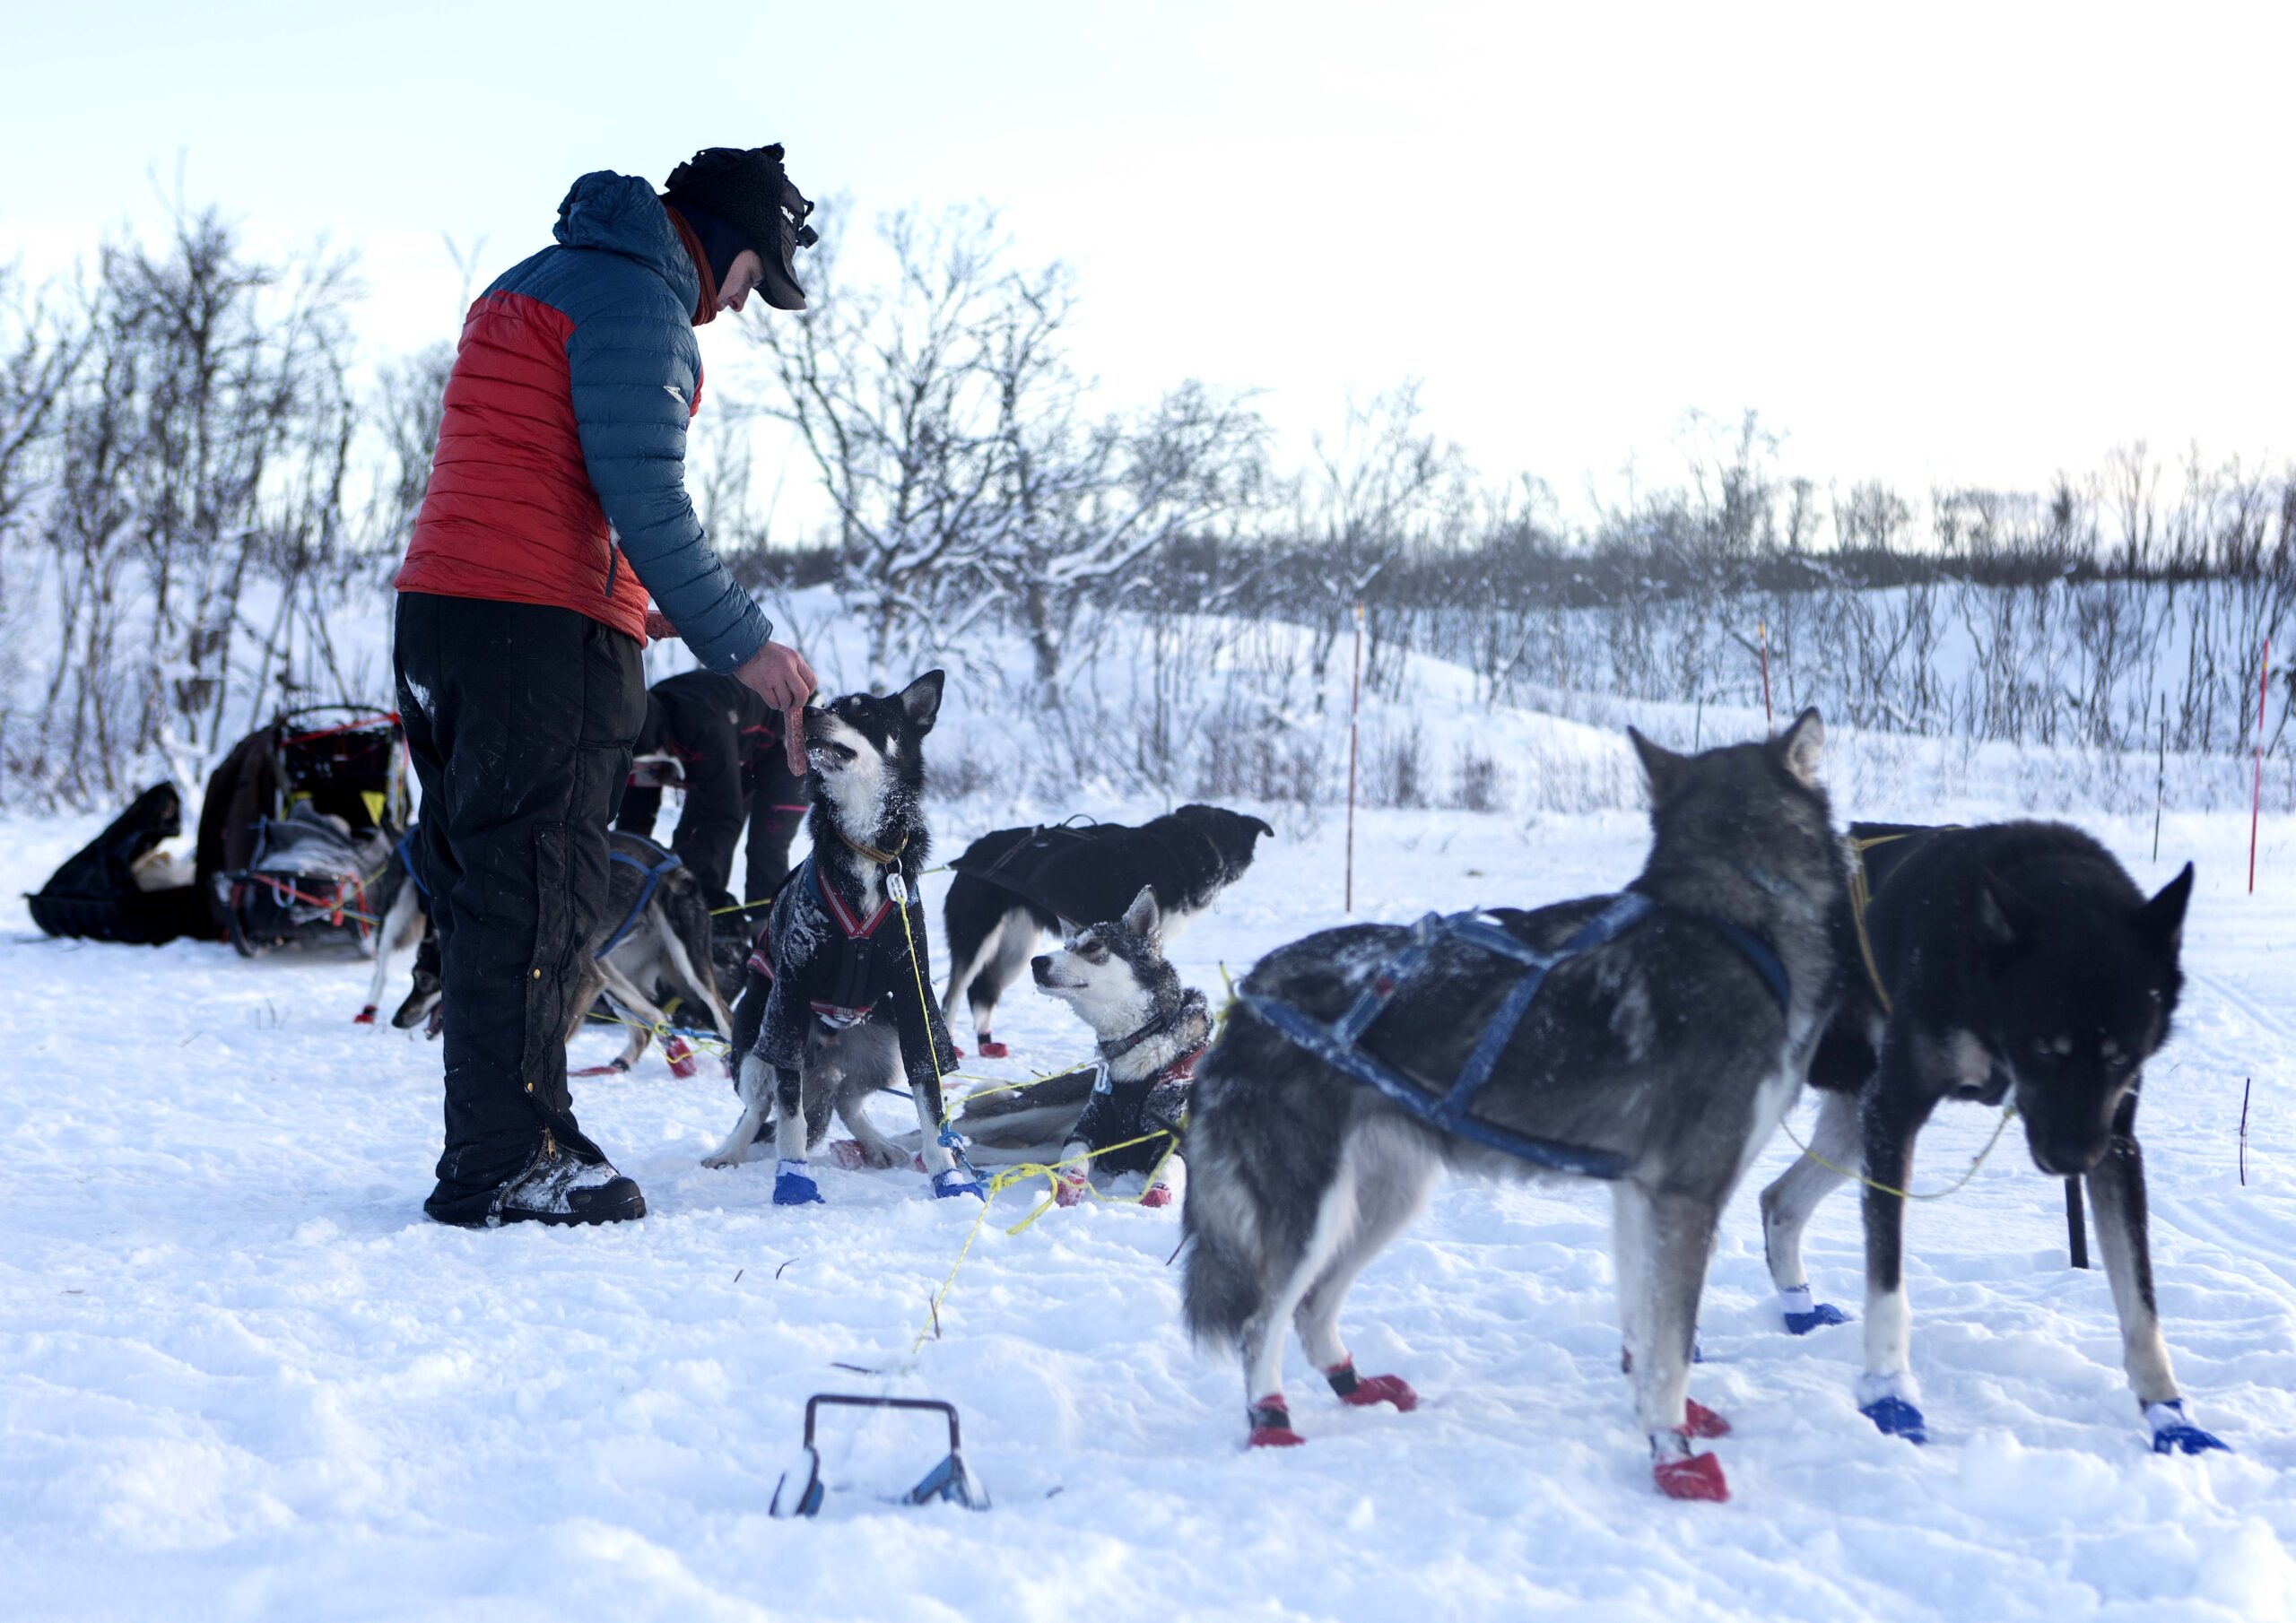 The musher feeds the dogs at the check point